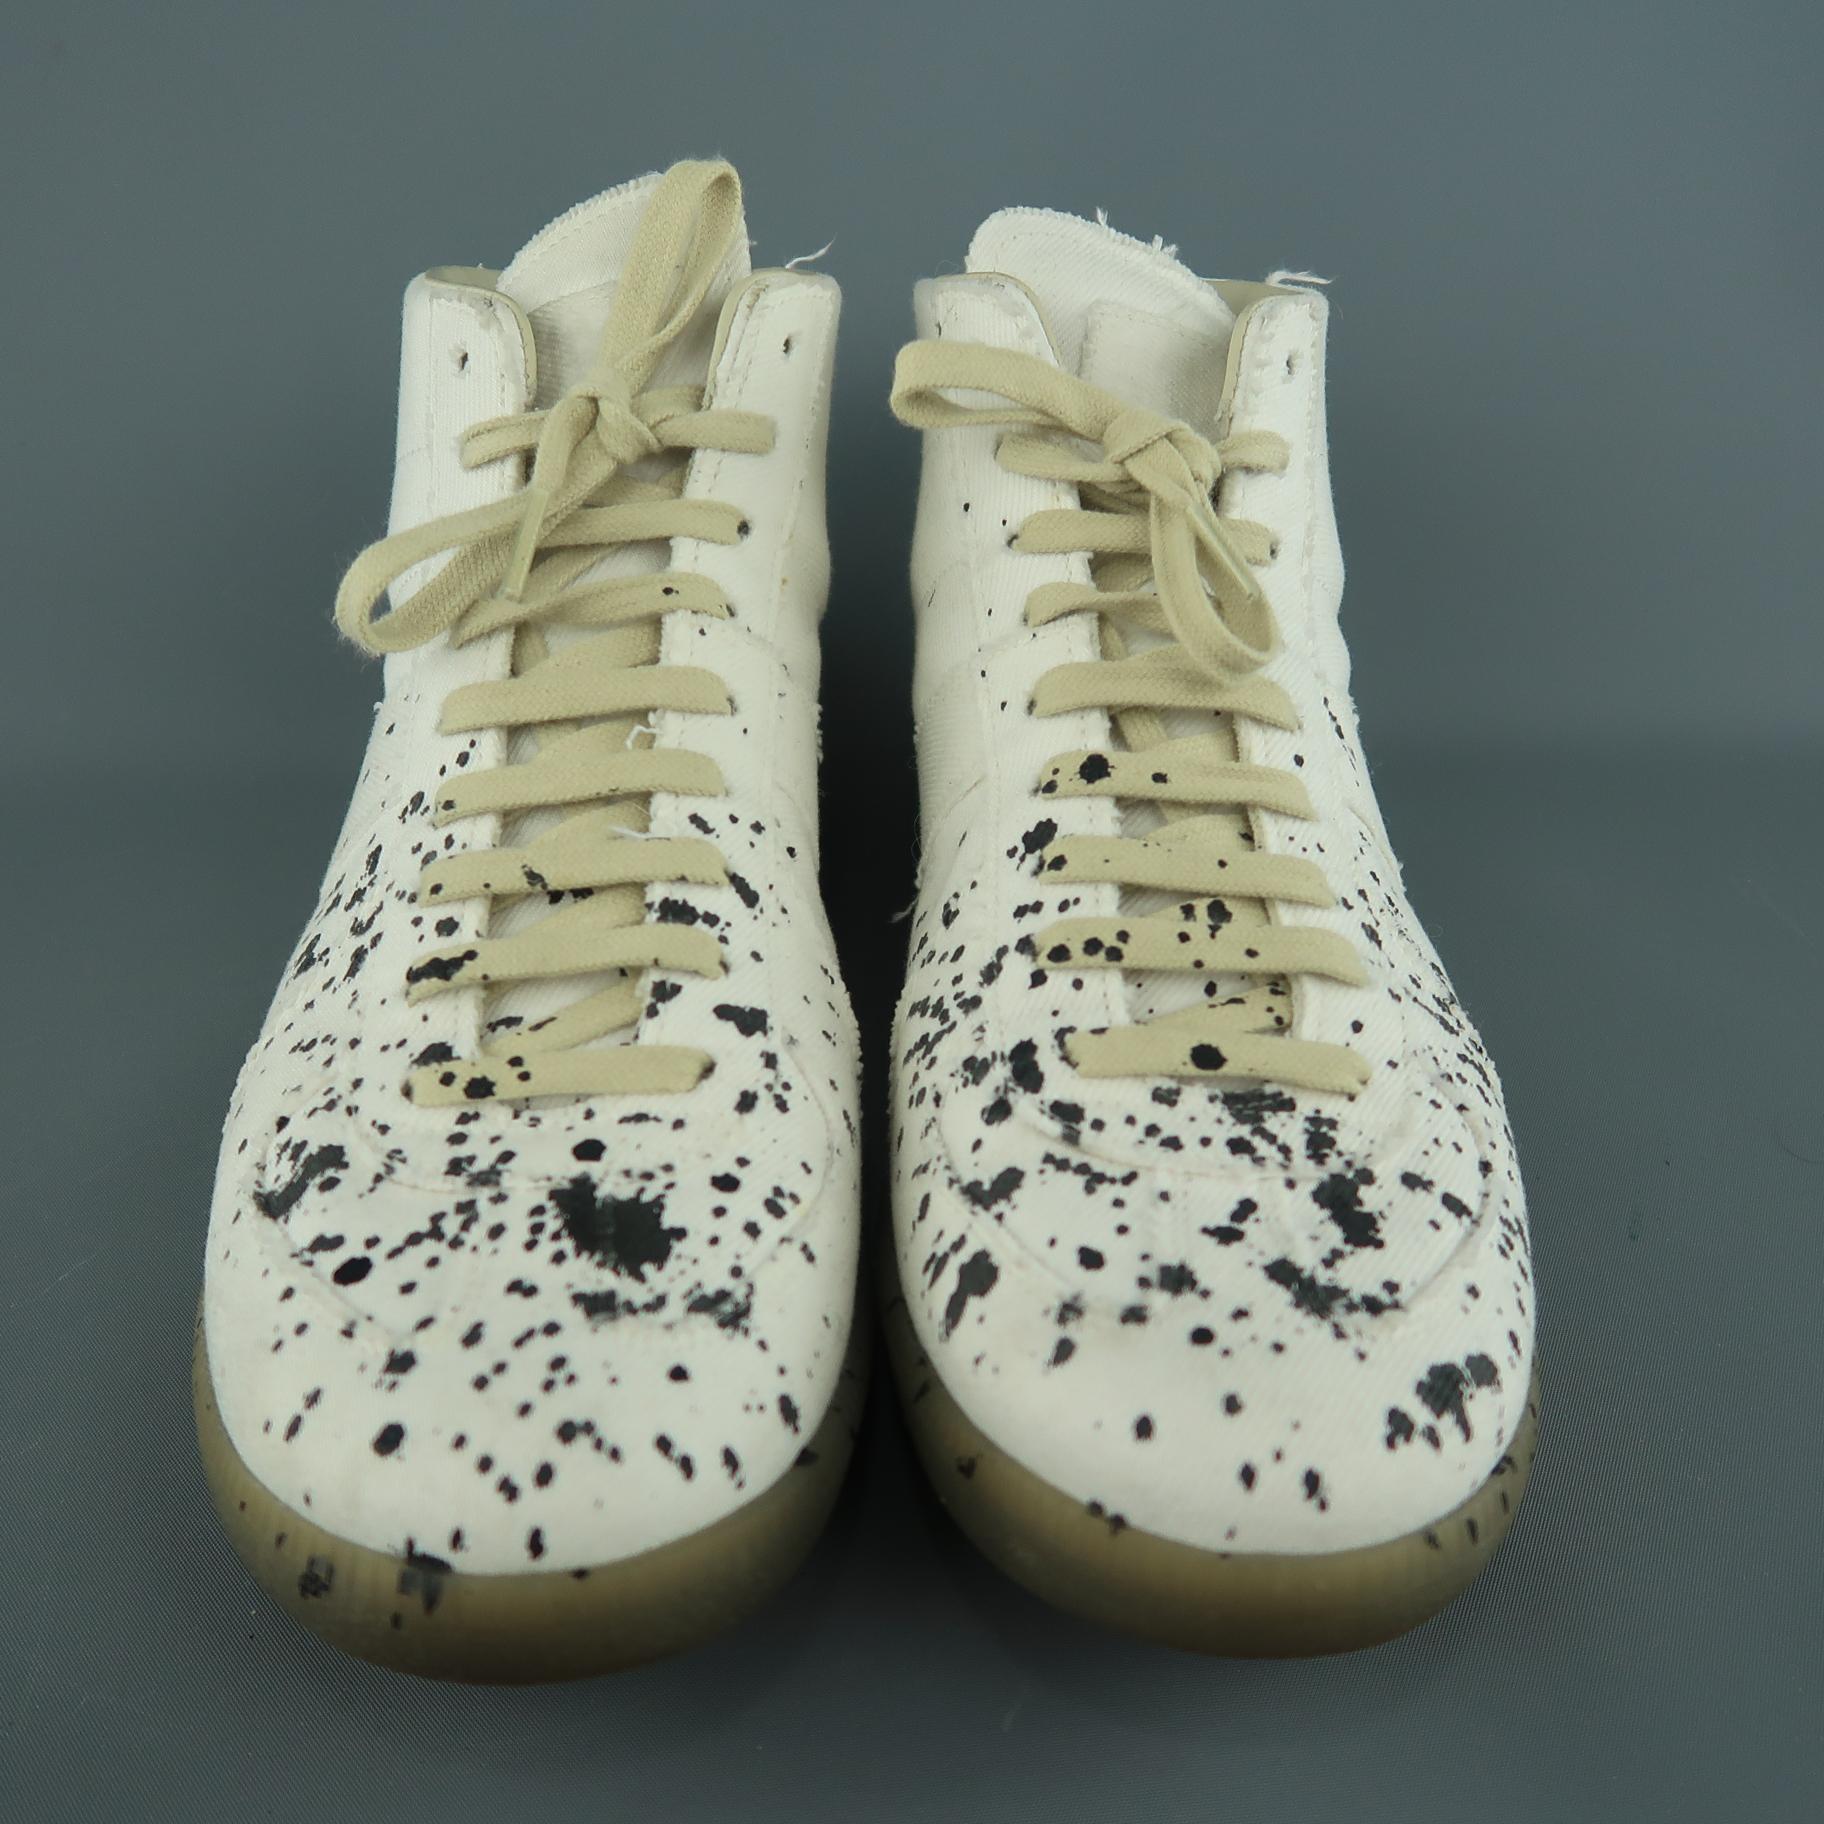 Men's MAISON MARGIELA Size 11 White Ink Splattered Canvas High Top Trainer Sneakers